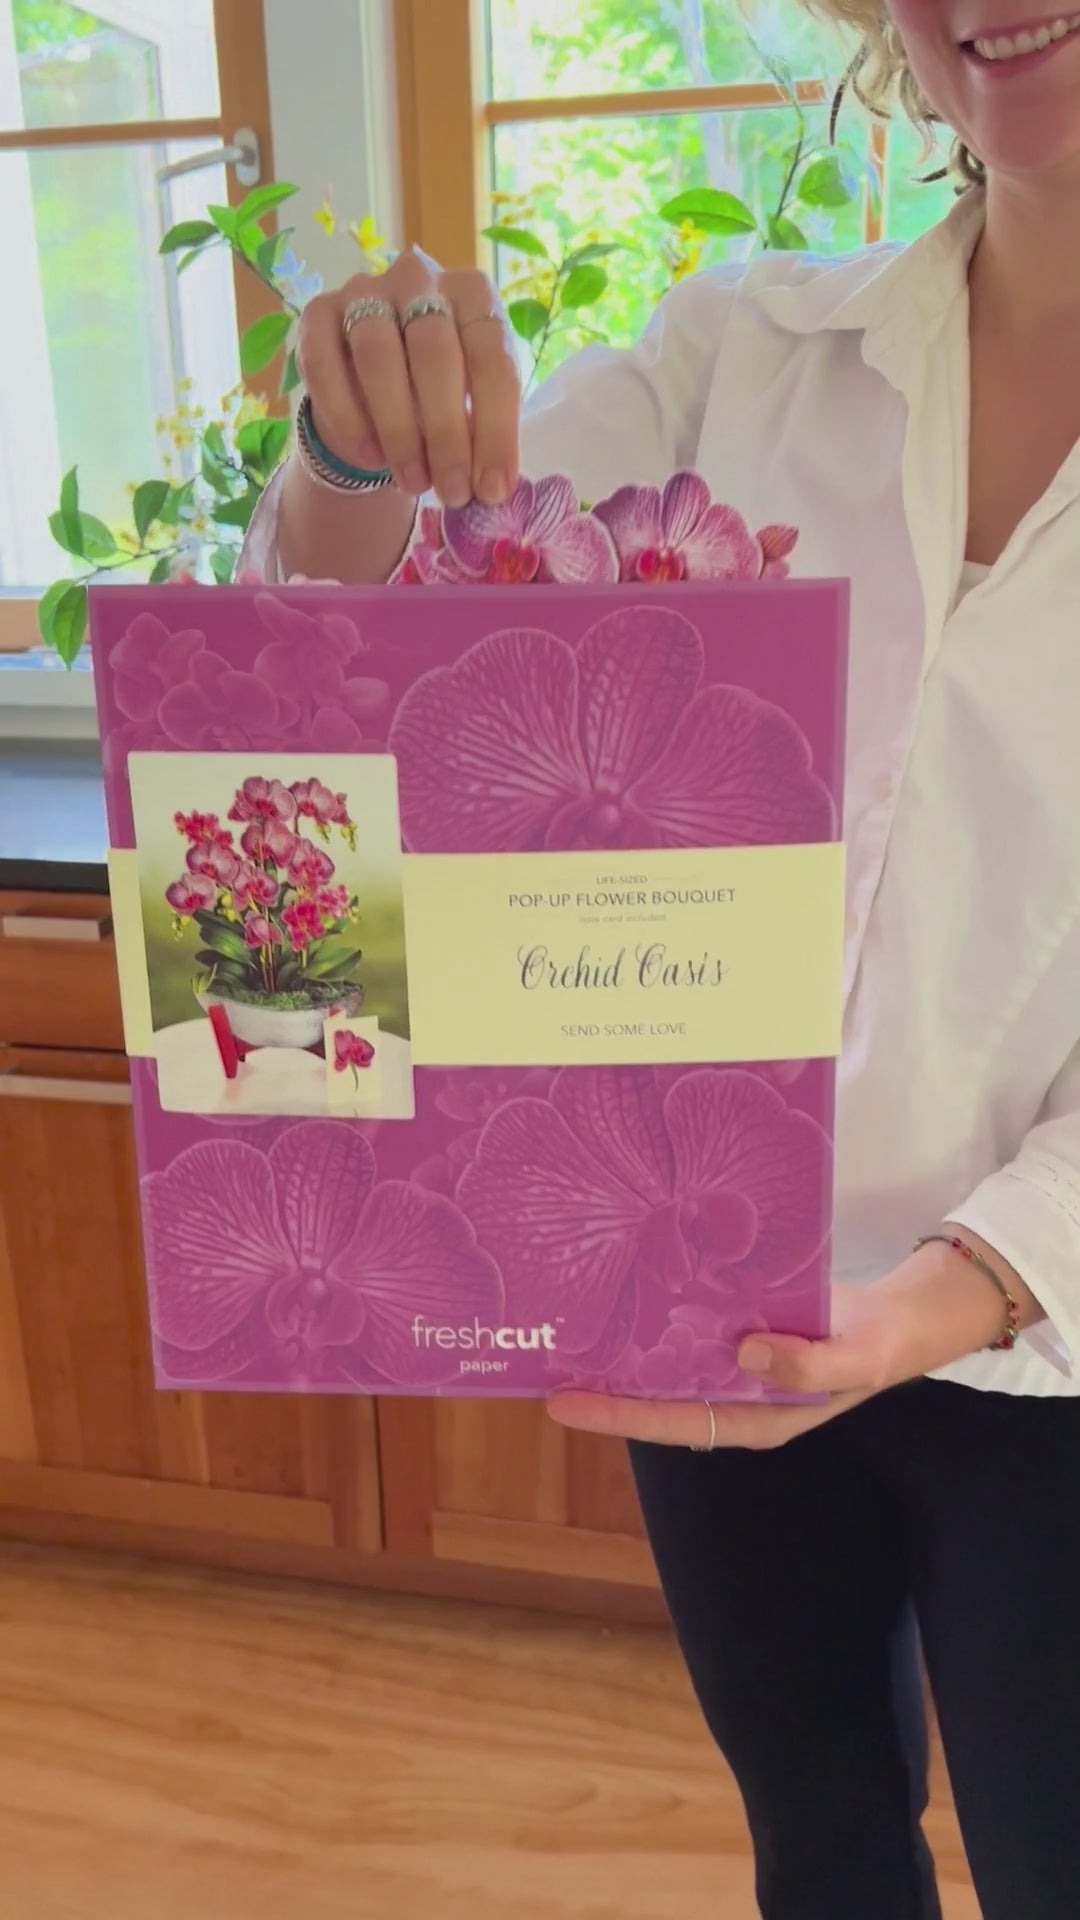 Pop Up Flower Bouquet Greeting Card - Orchid Oasis